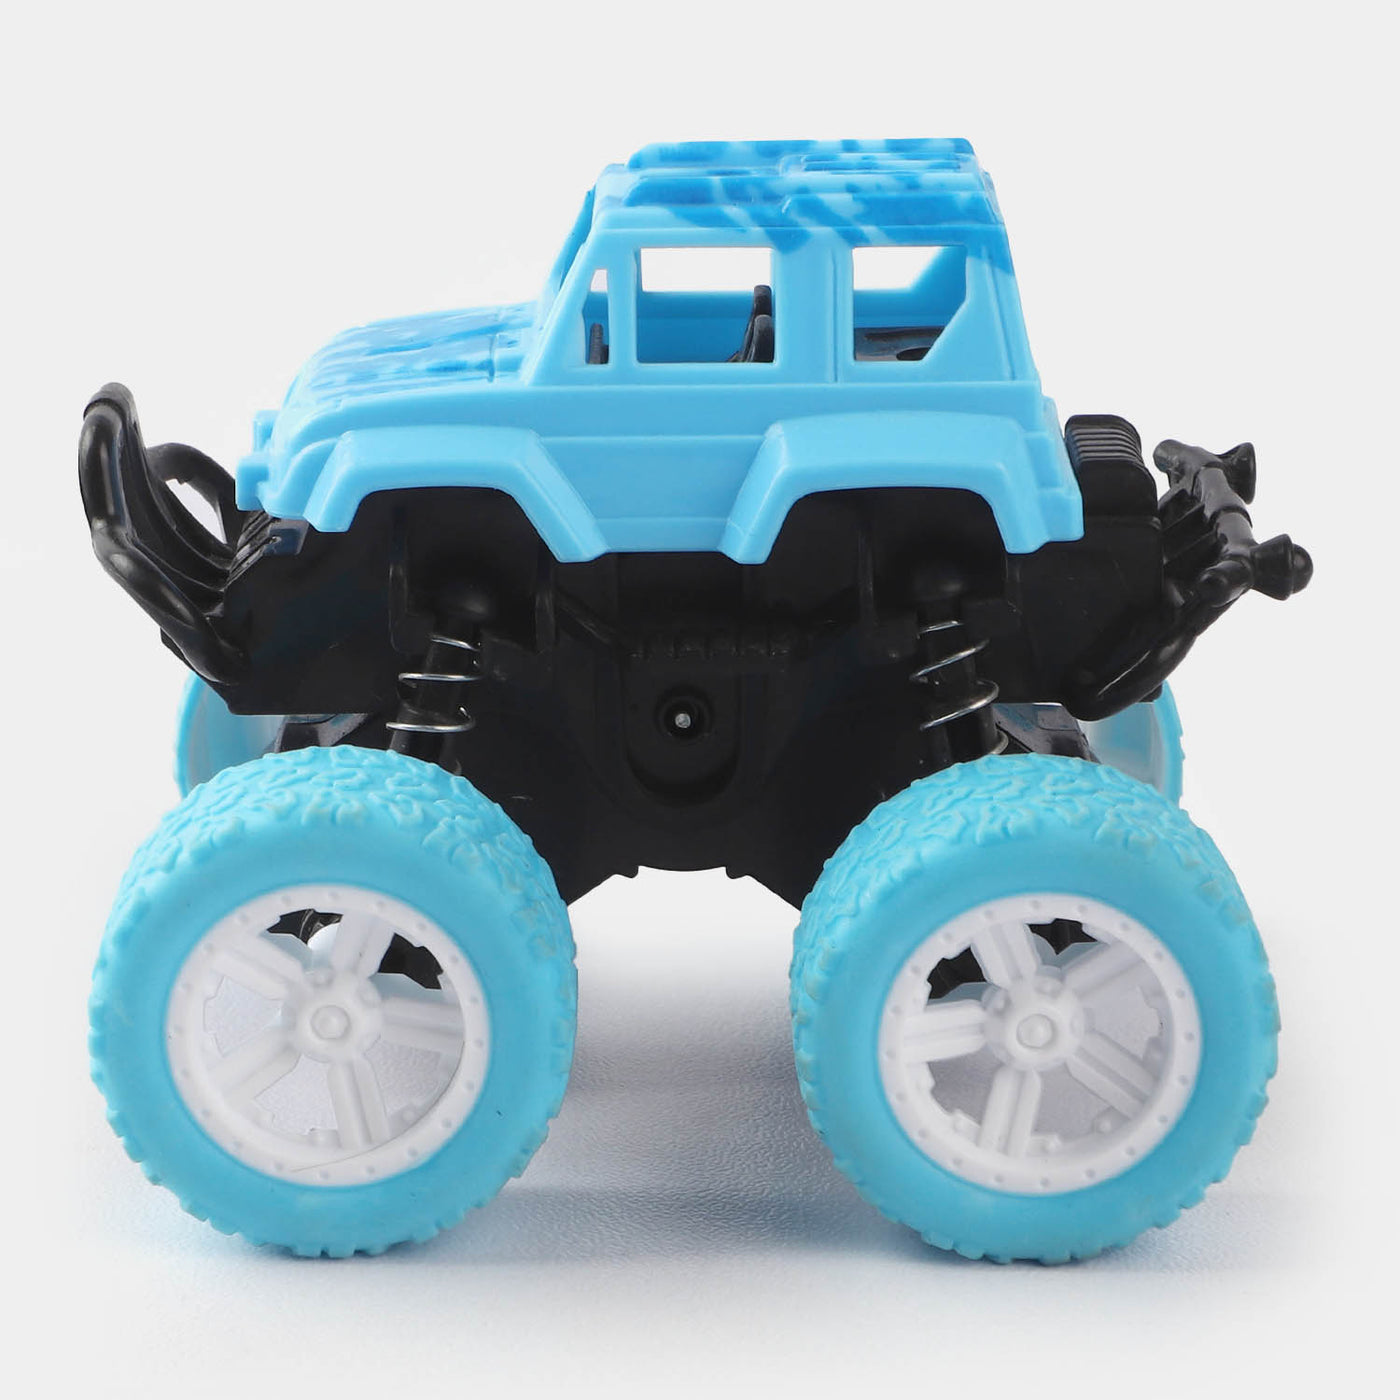 Friction Mini Model Vehicle Toy For Kids